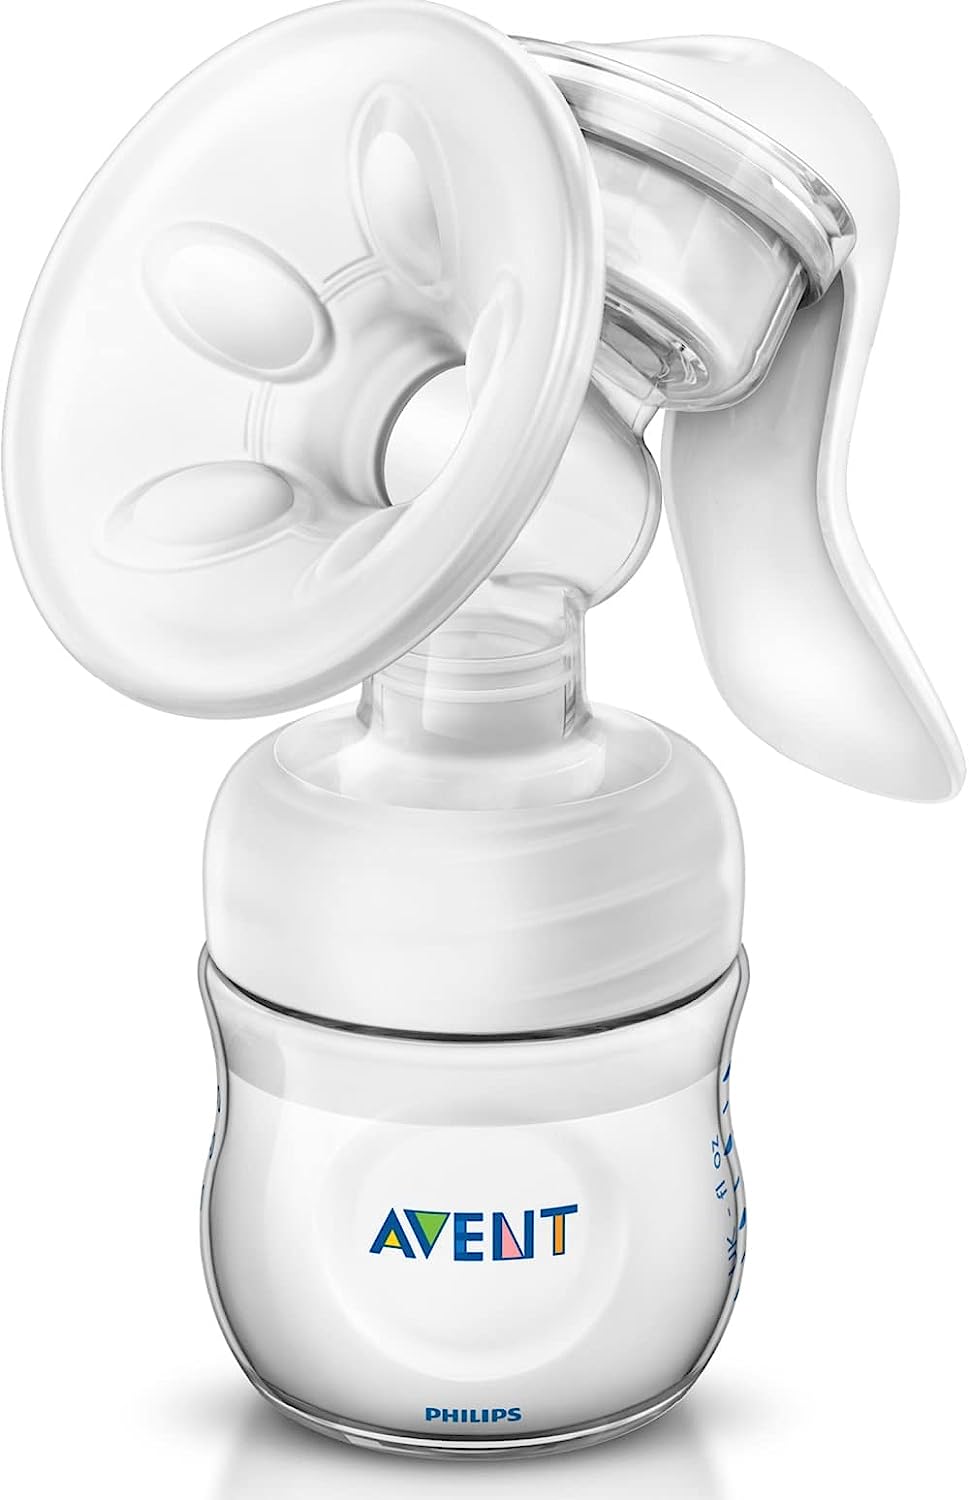 Philips Avent manual breast pump - easy pumping, with Natural Motion technology, BPA-free (model SCF430/01) - Baby Bliss